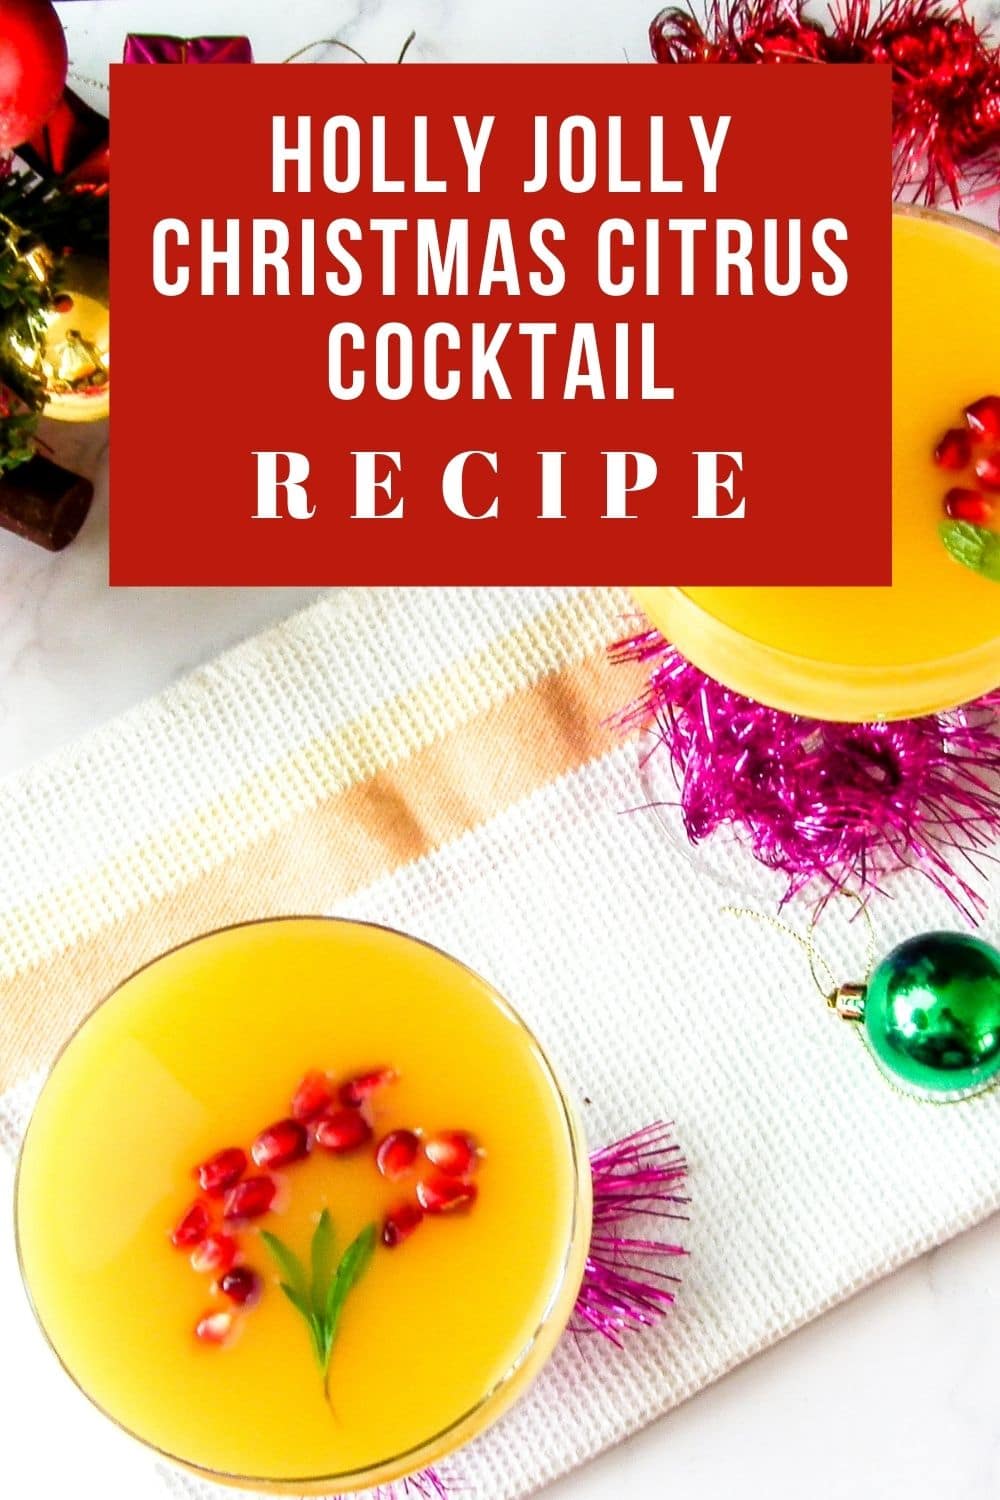 Holly Jolly Christmas cocktail recipe